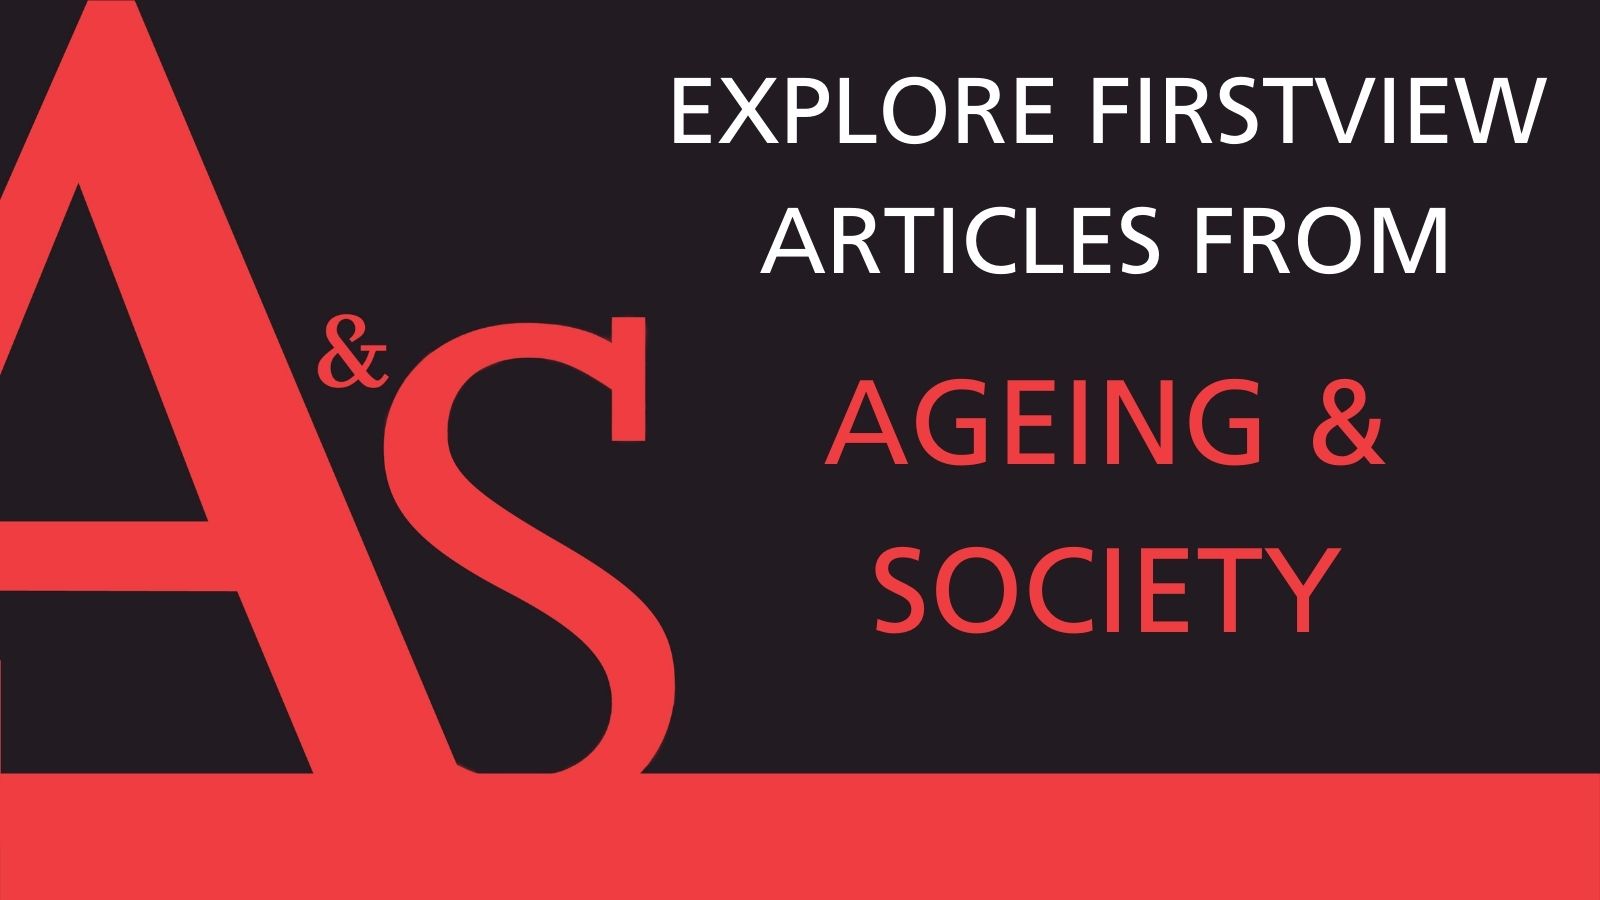 Explore FirstView articles from Ageing & Society